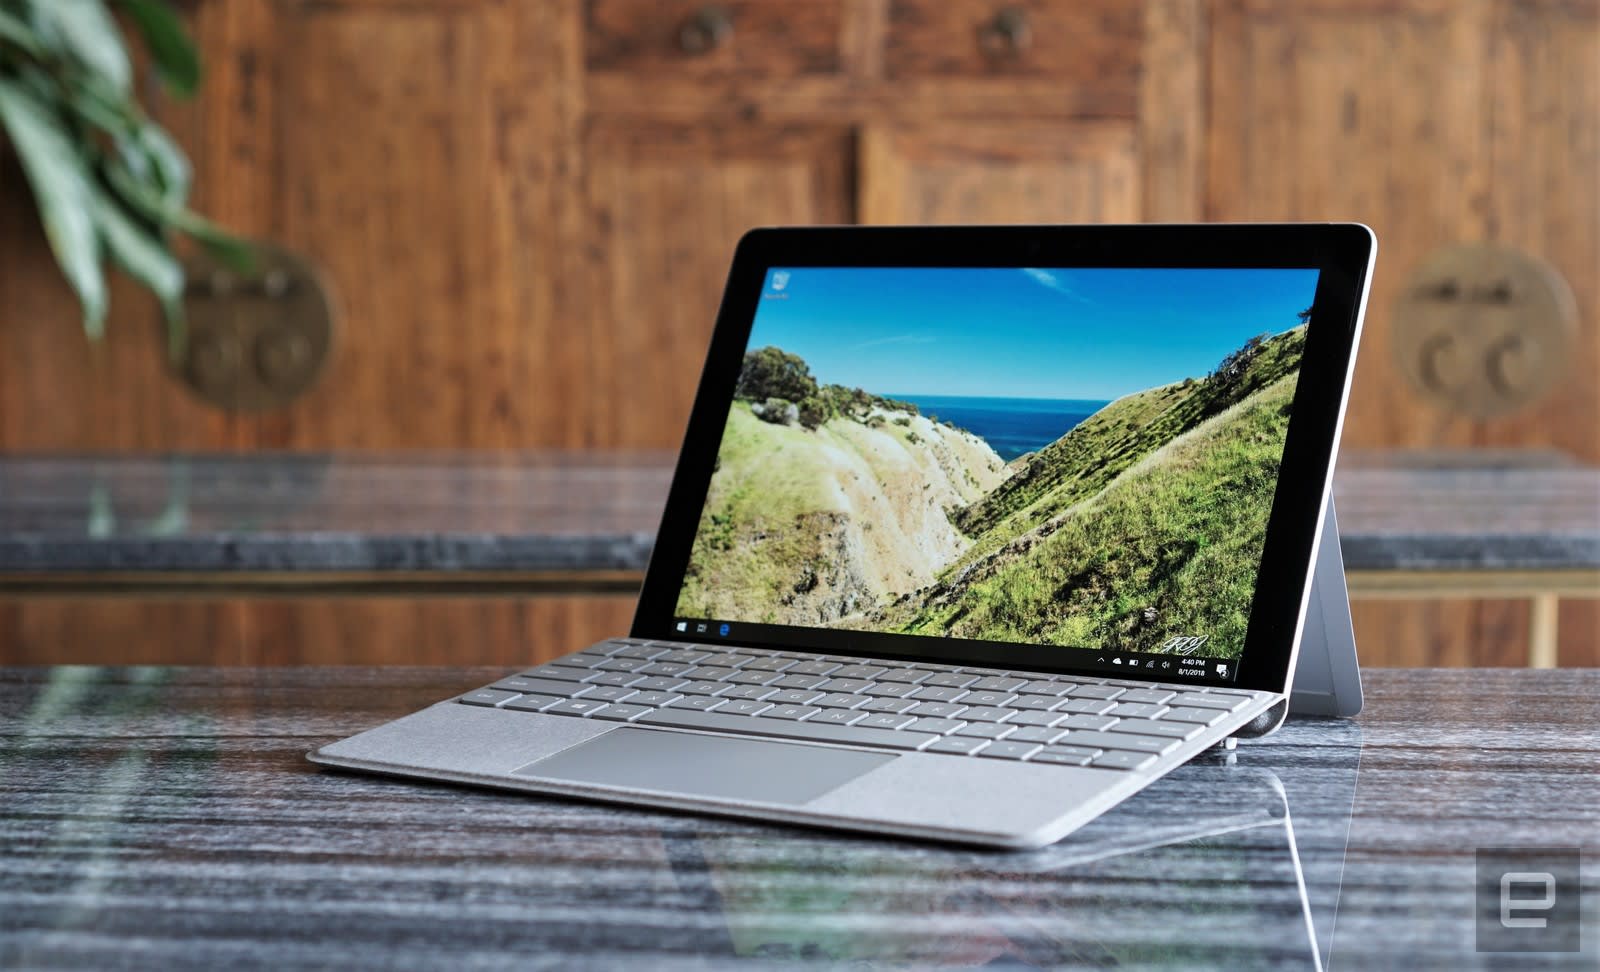 Microsoft Surface Go review: The ideal cheap Windows tablet